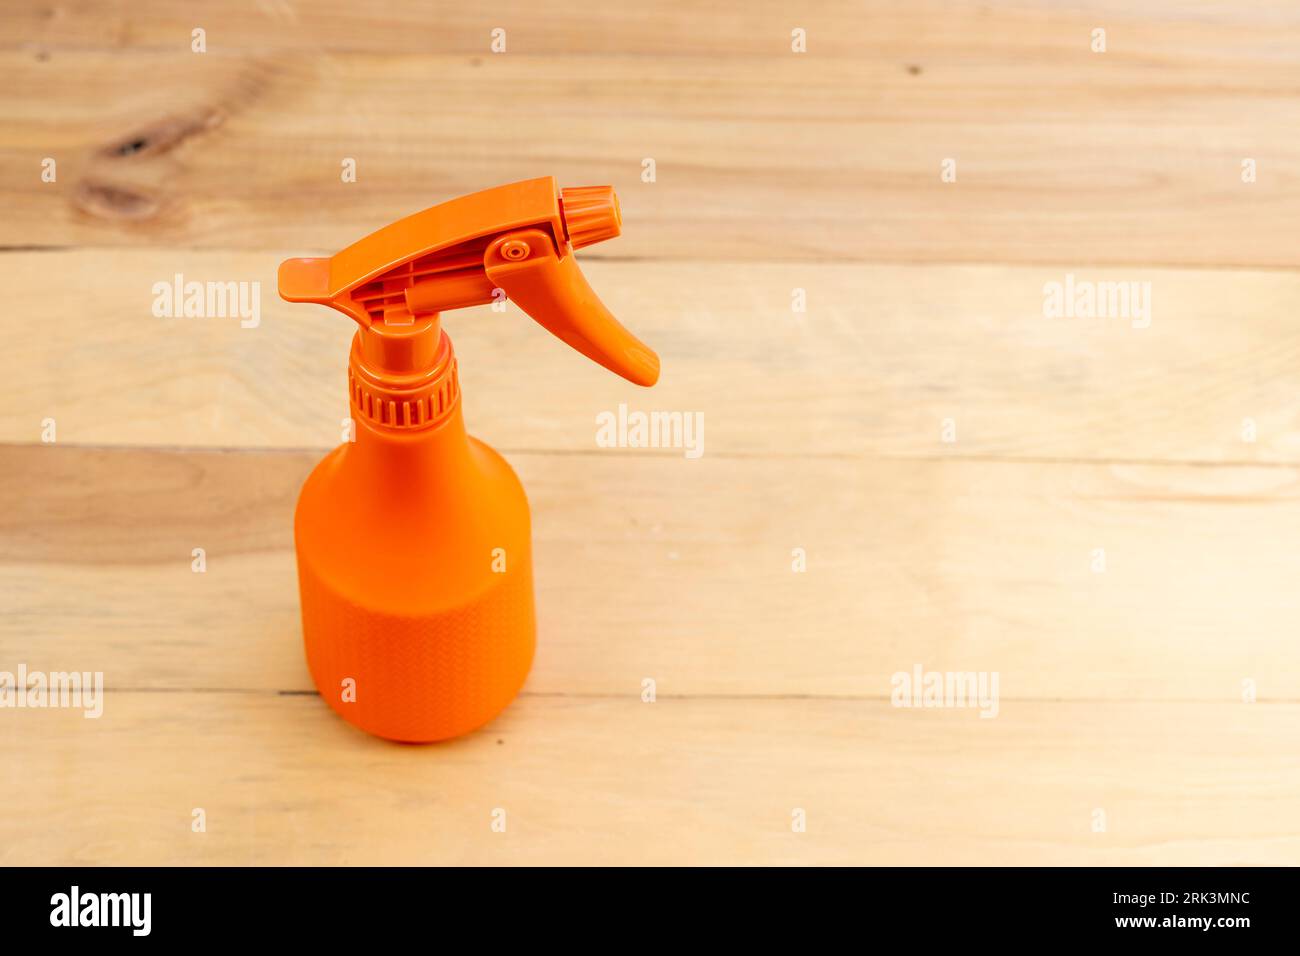 Sprayer bottle on wooden background with copy space Stock Photo